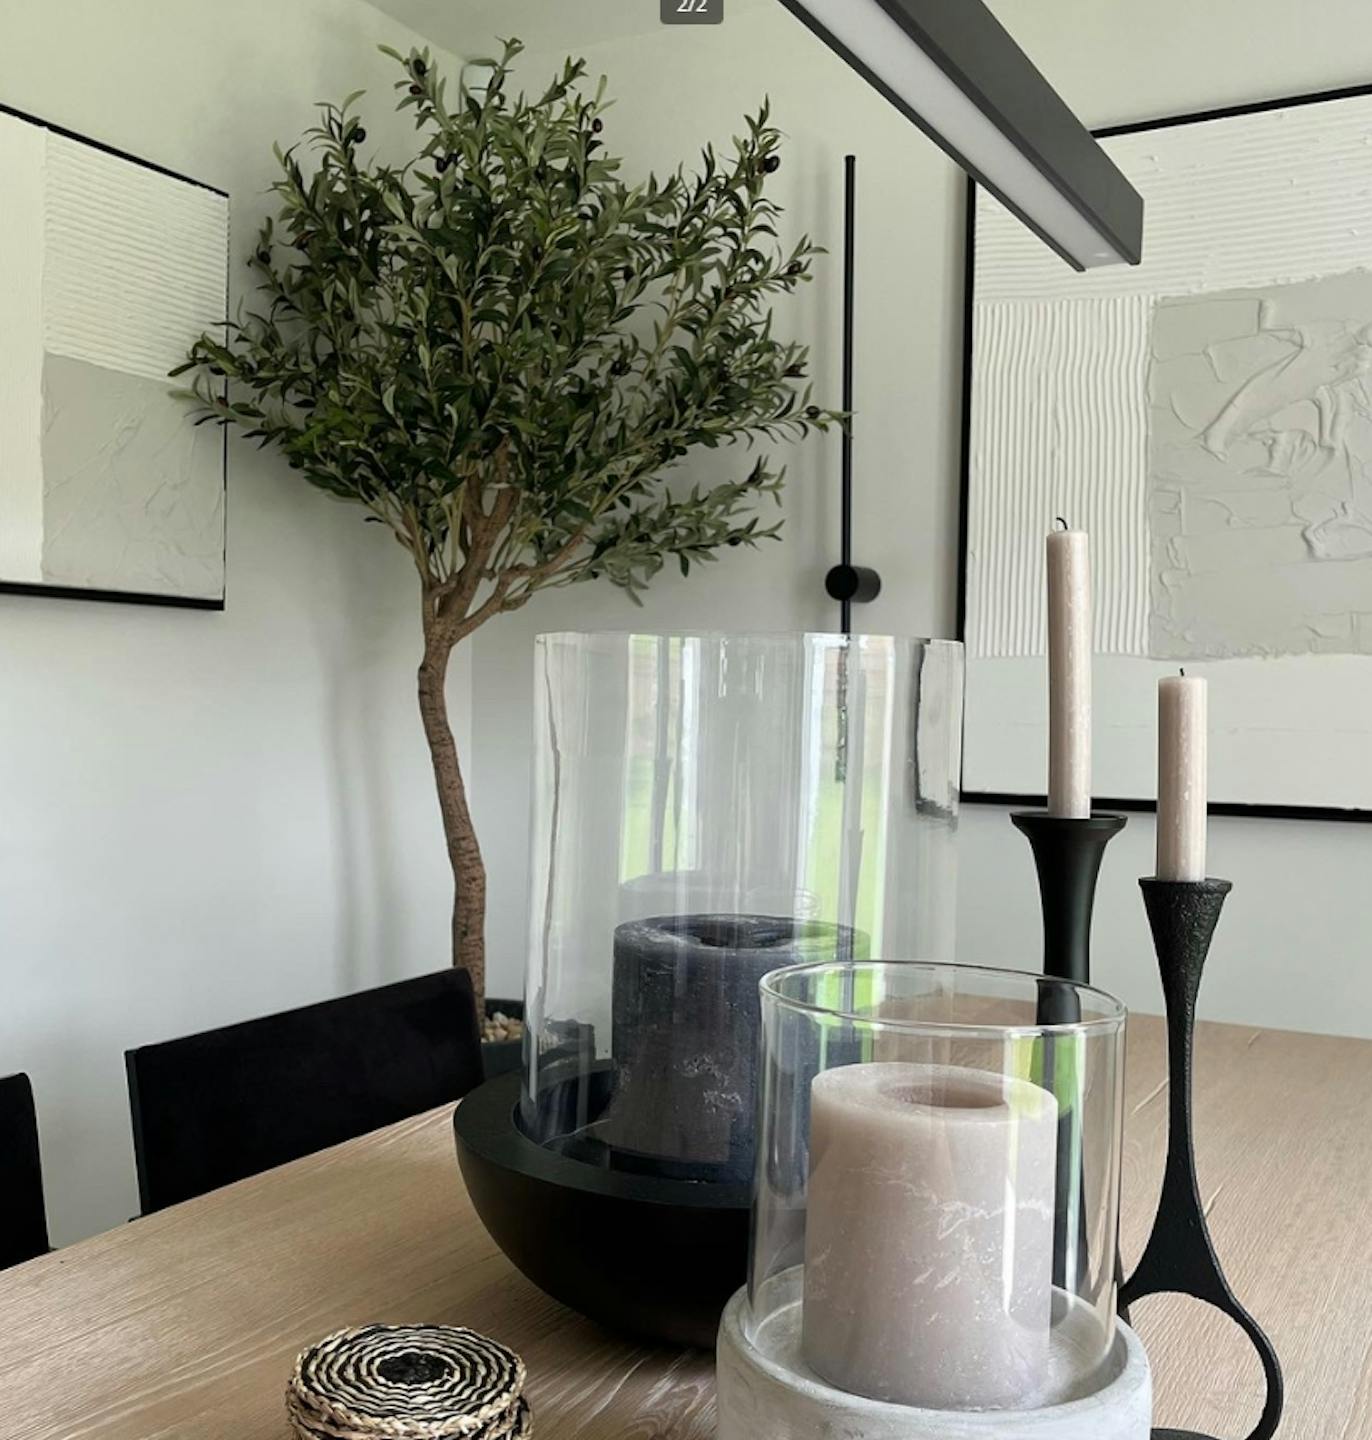 Artificial Ligurian olive tree stood near wooden dining table